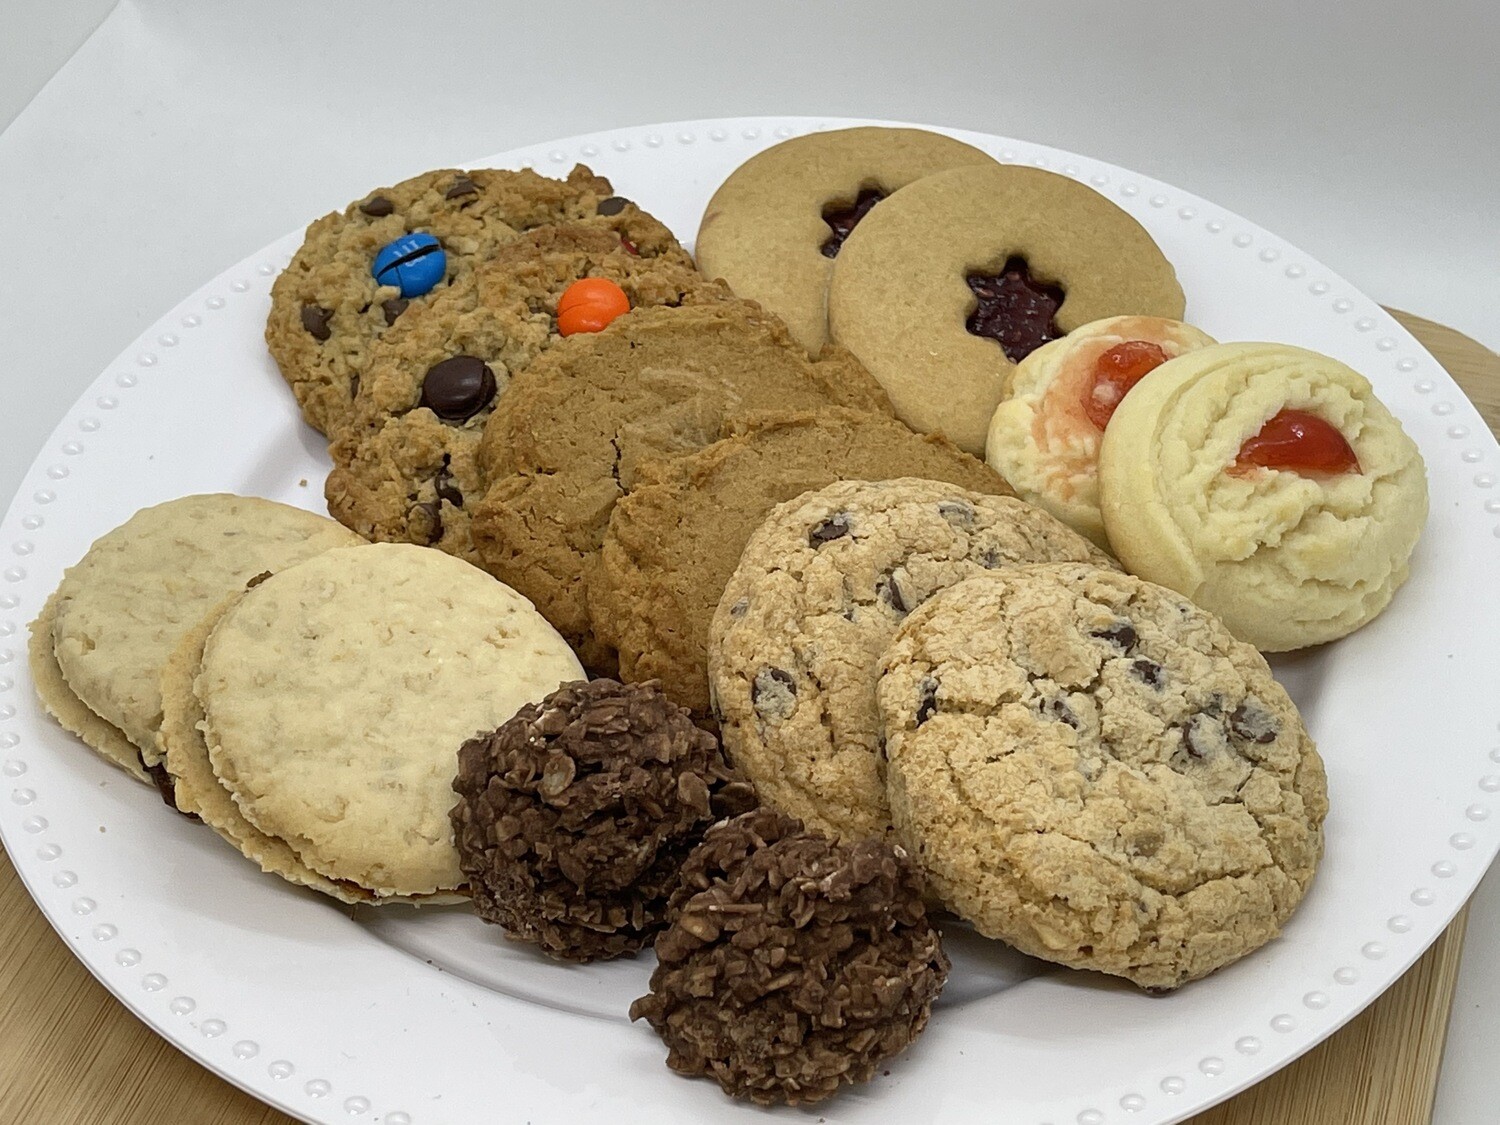 Variety Tray - Cookies